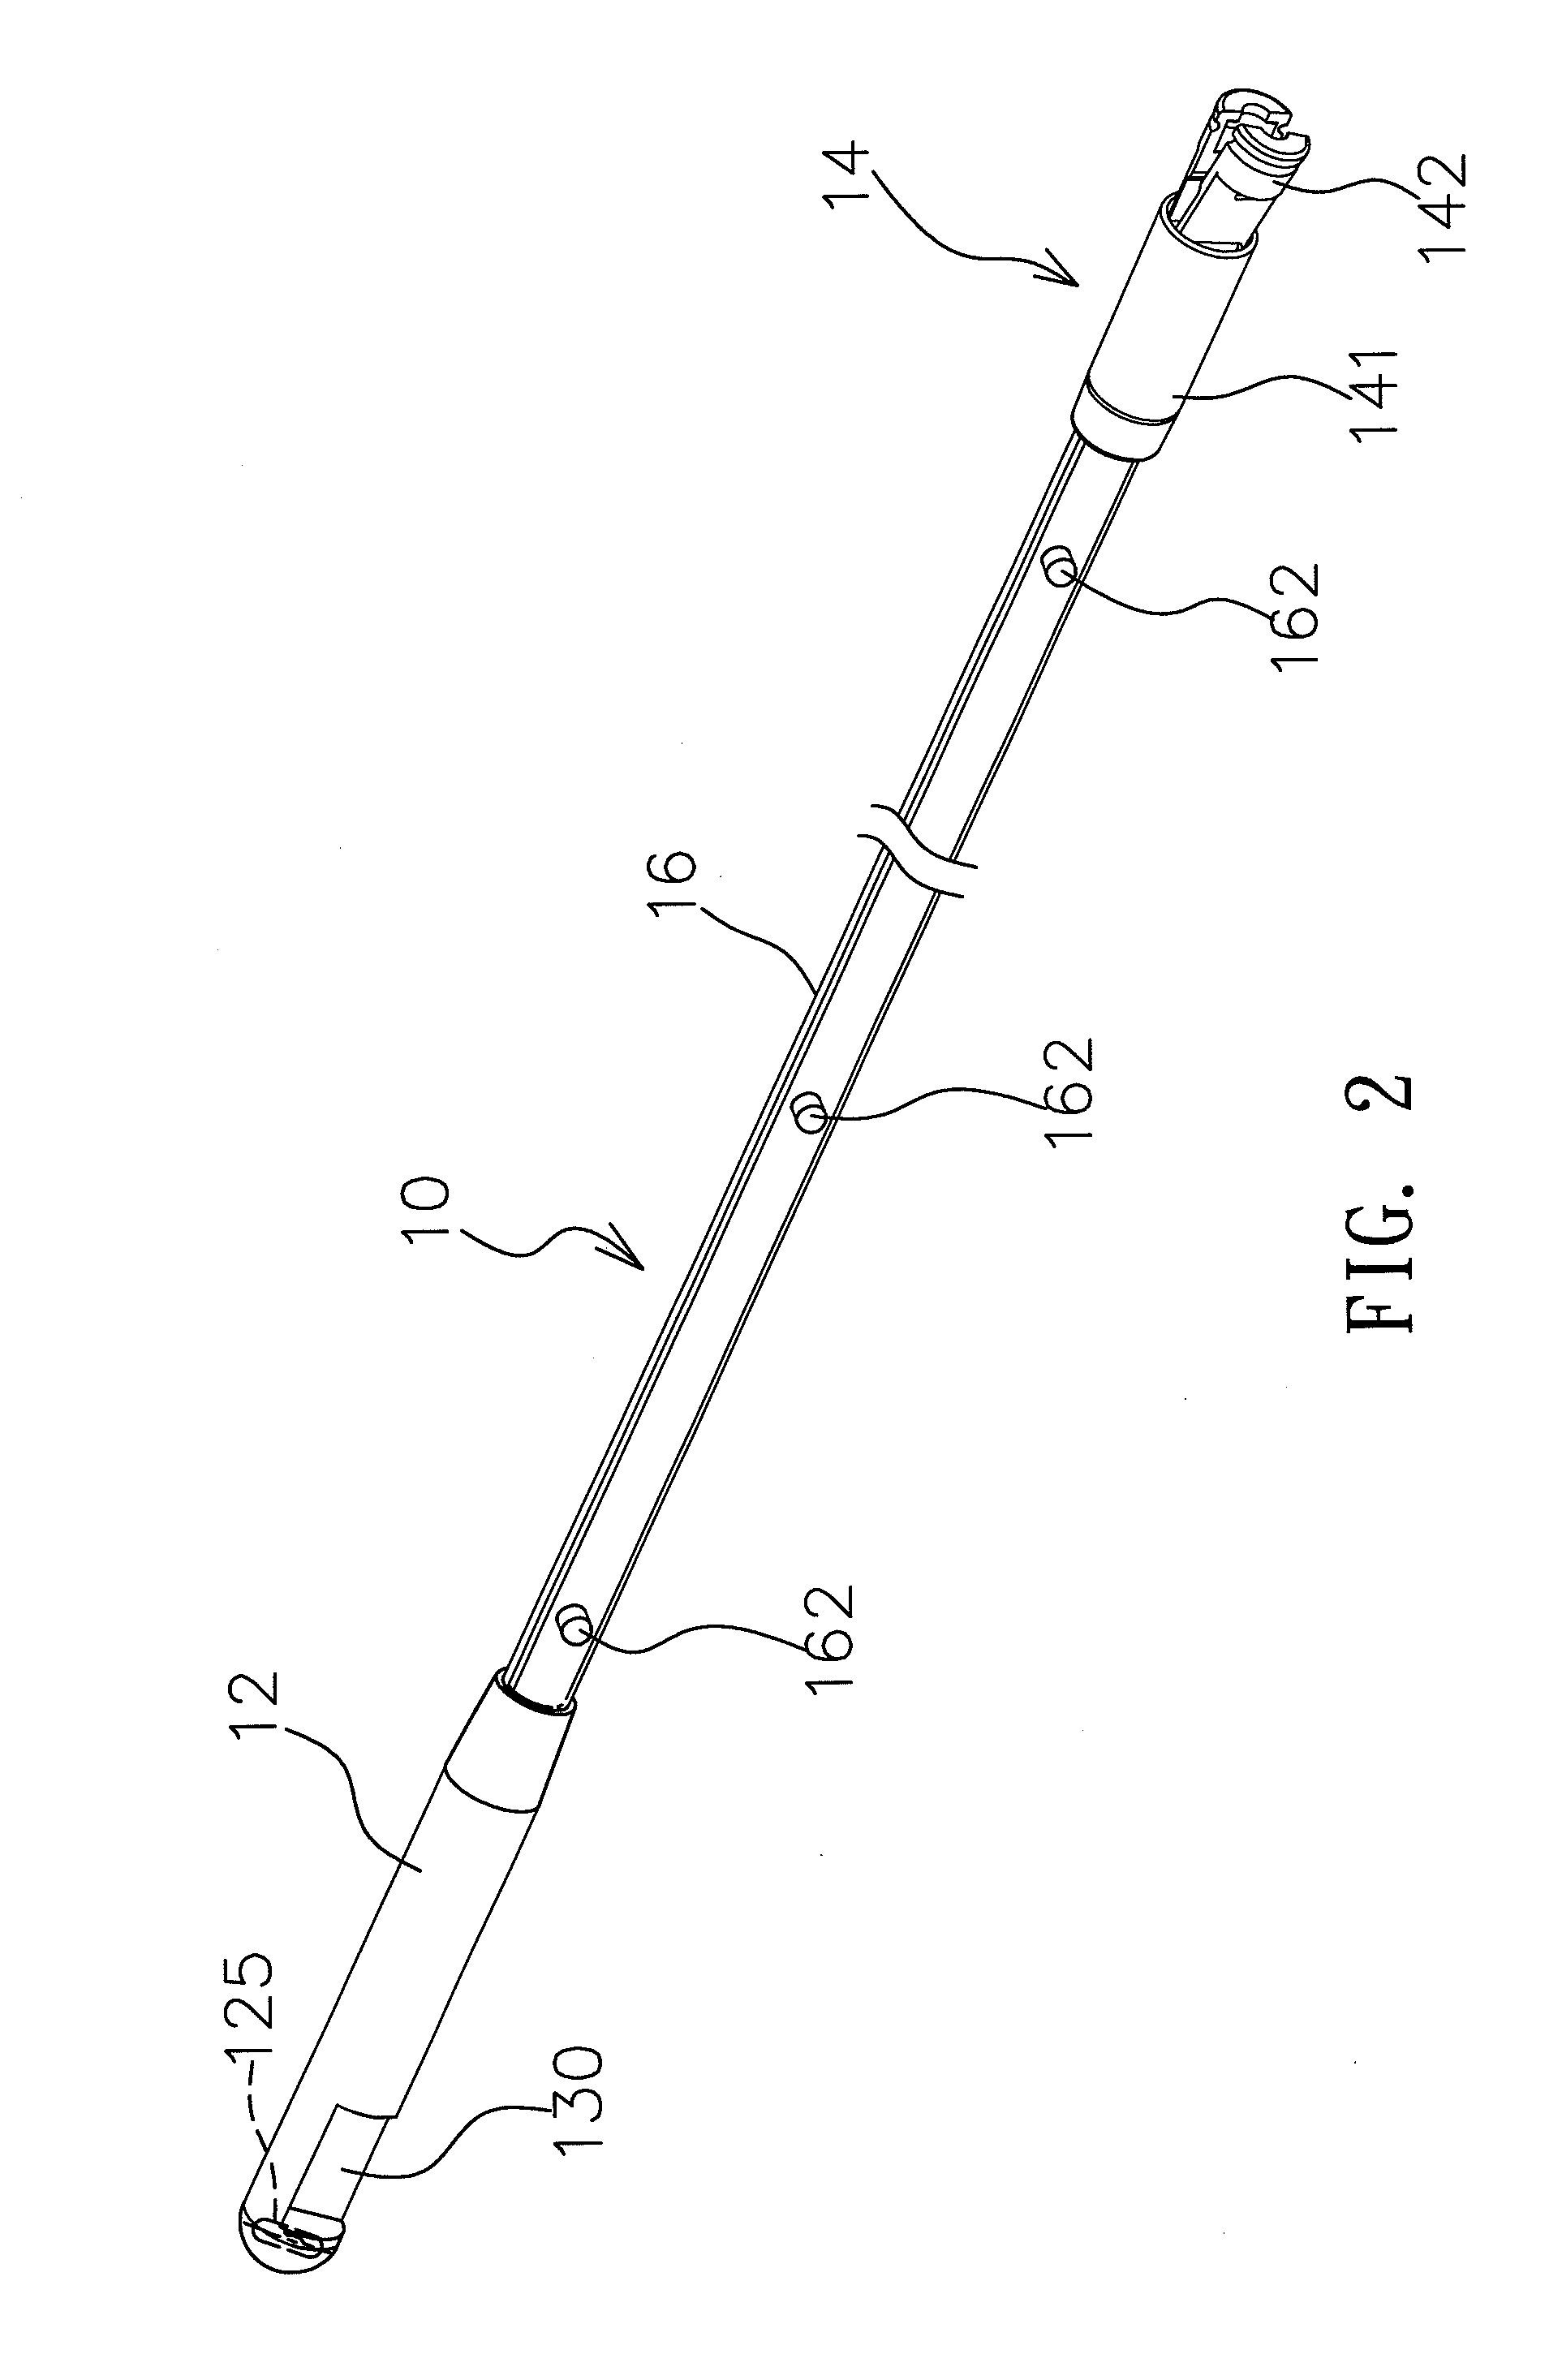 Illumination device controlled by magnetic reed module in cabinet